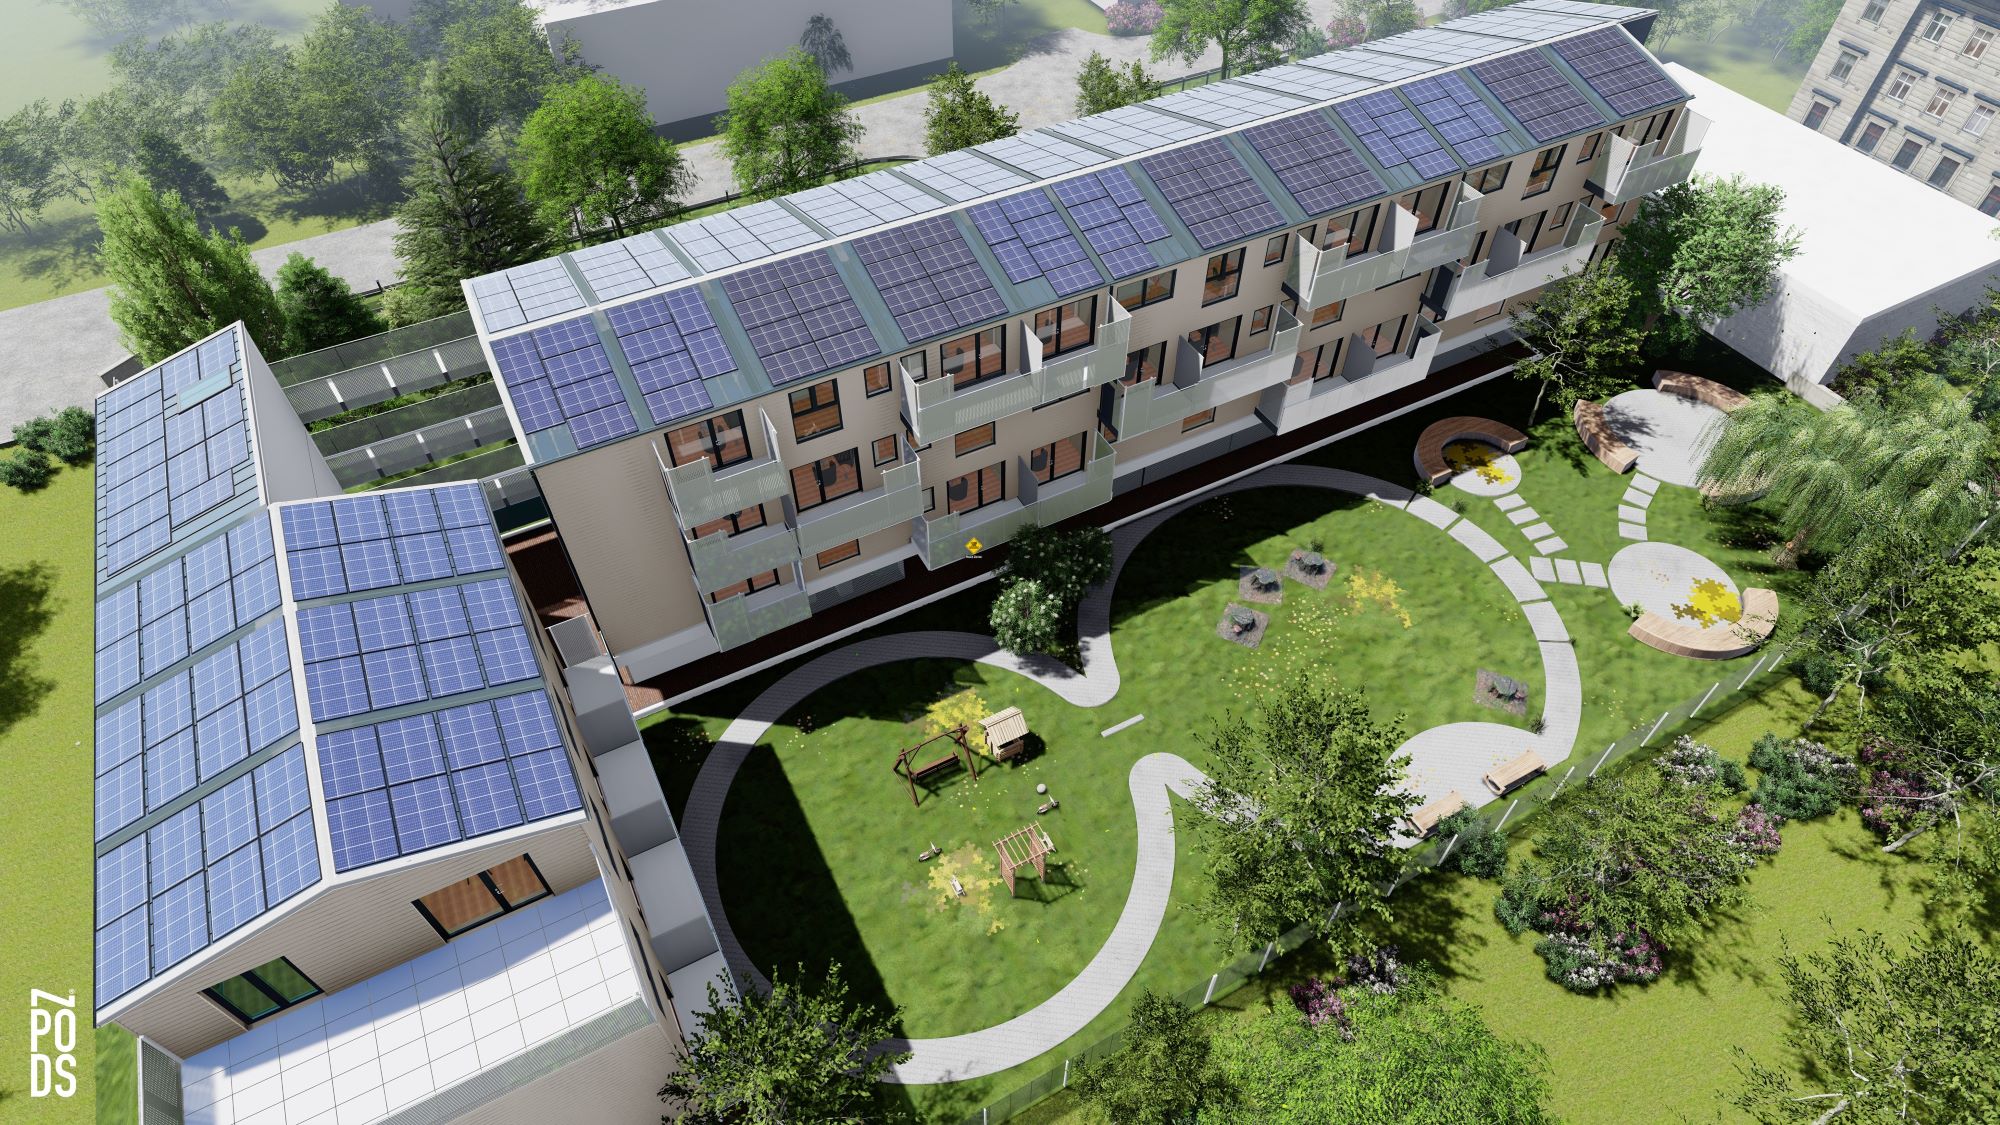 Zed Pods is currently constructing 23 energy-efficient, modular homes in Ashford (image: Zed Pods).